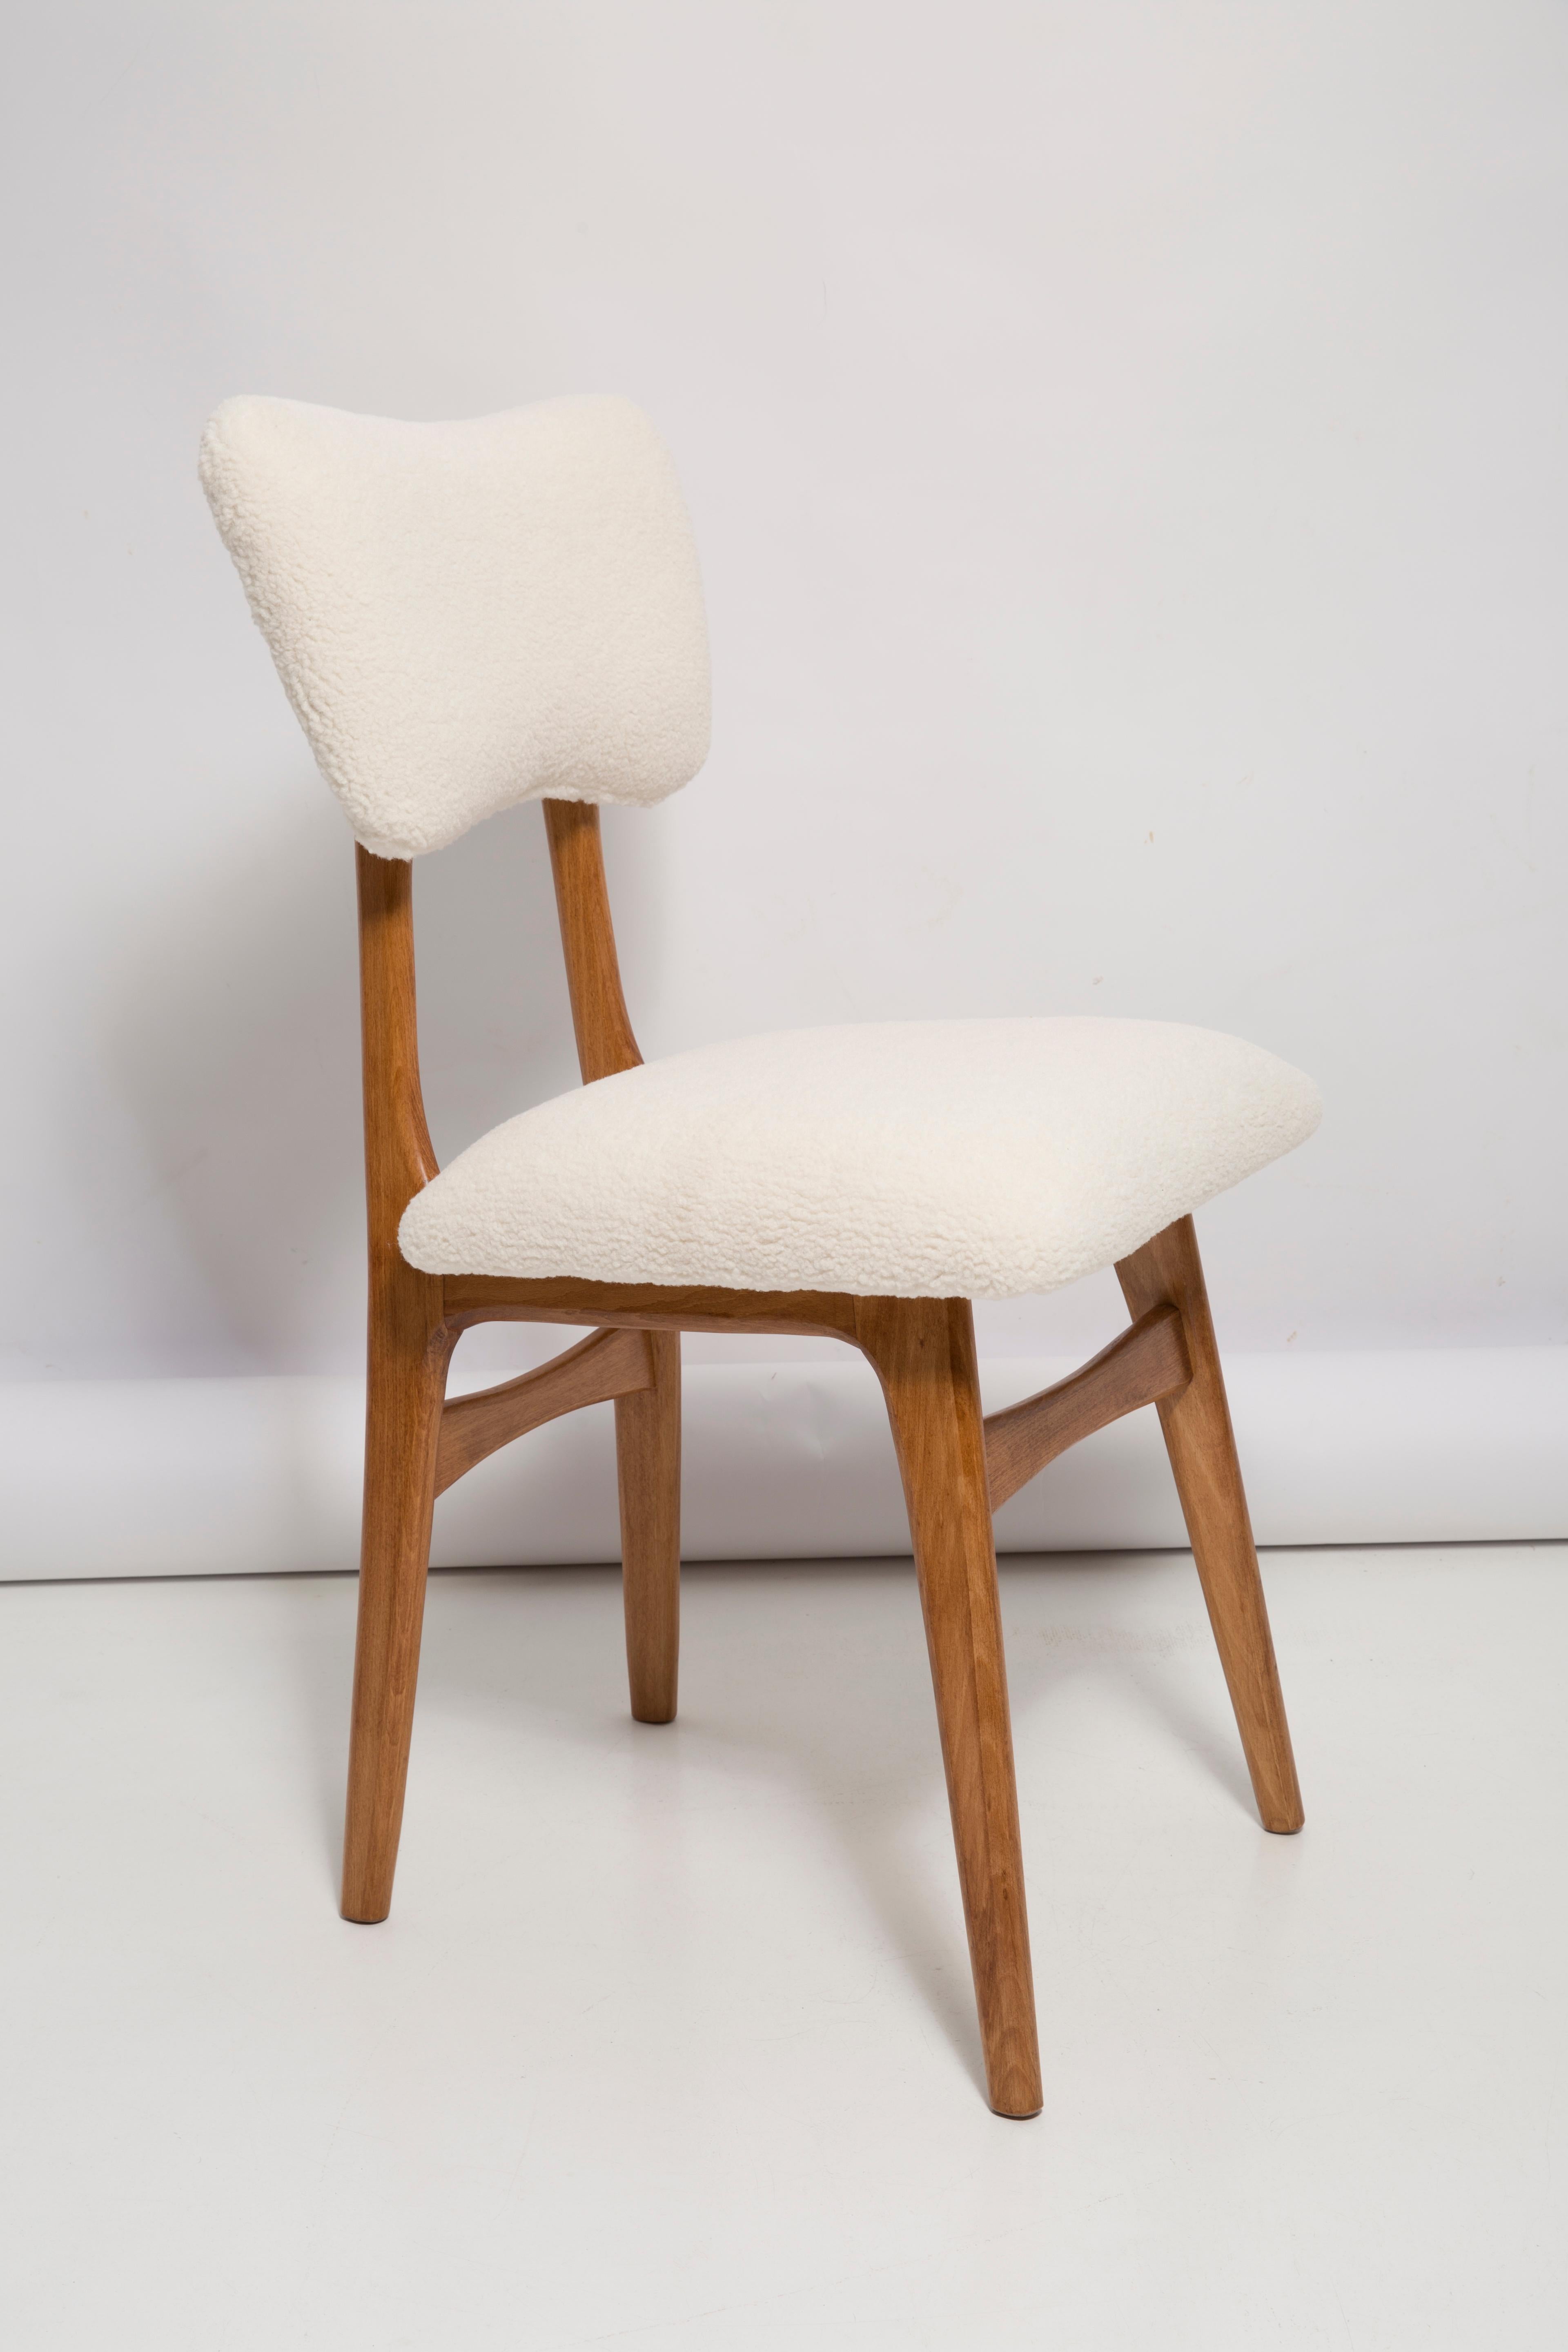 Chair designed by Prof. Rajmund Halas. Made of beechwood in medium oak color. Chair is after a complete upholstery renovation; the woodwork has been refreshed. Seat and back is dressed in crème, durable and pleasant to the touch bouclé fabric (color